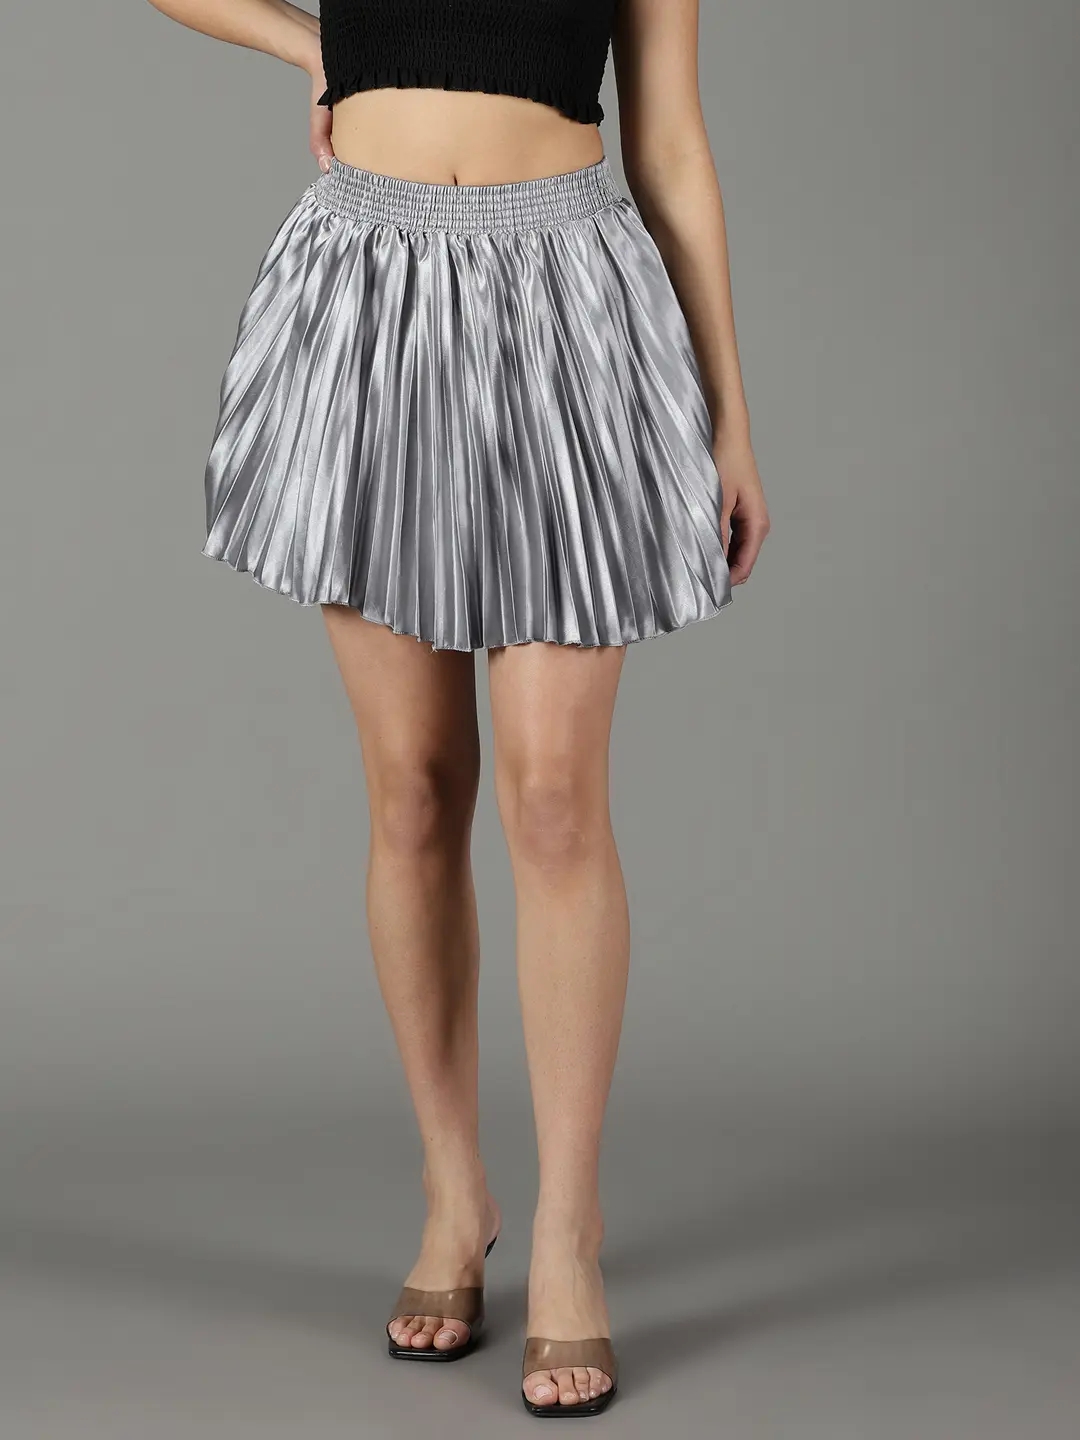 SHOWOFF Women's Solid Grey Satin Flared Skirt